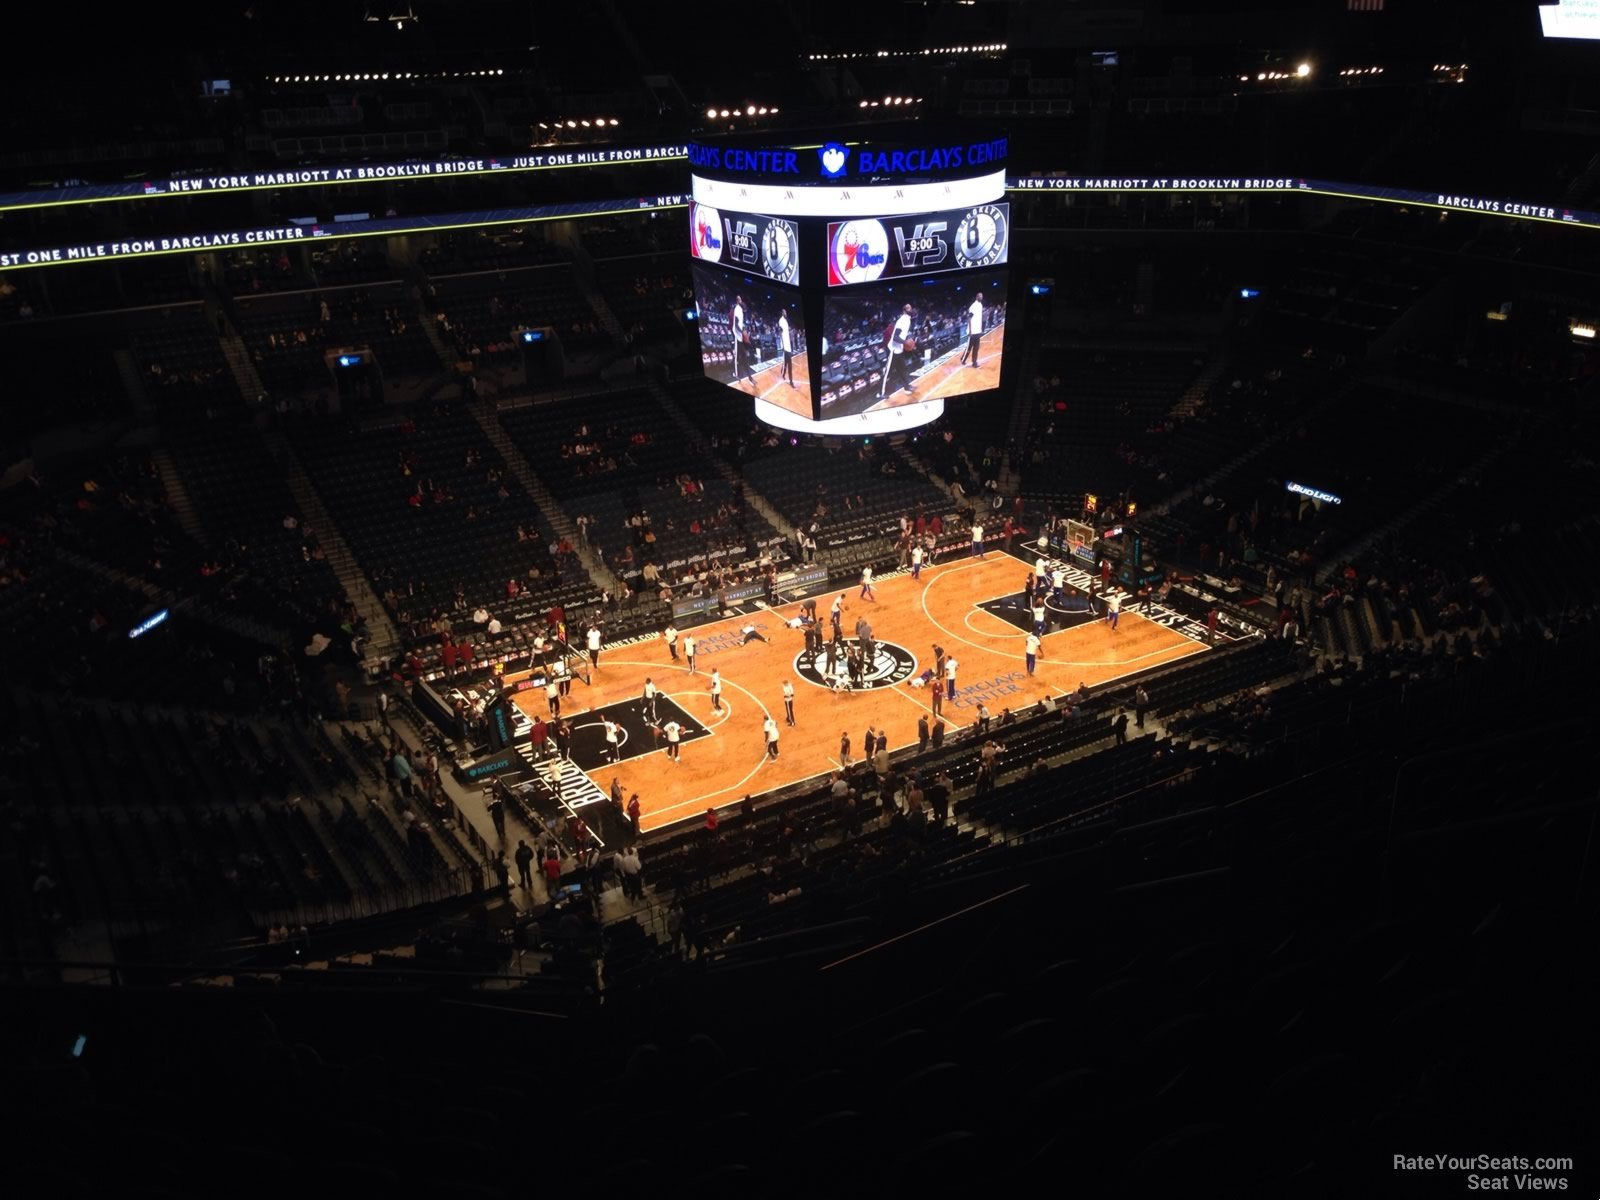 section 227, row 14 seat view  for basketball - barclays center